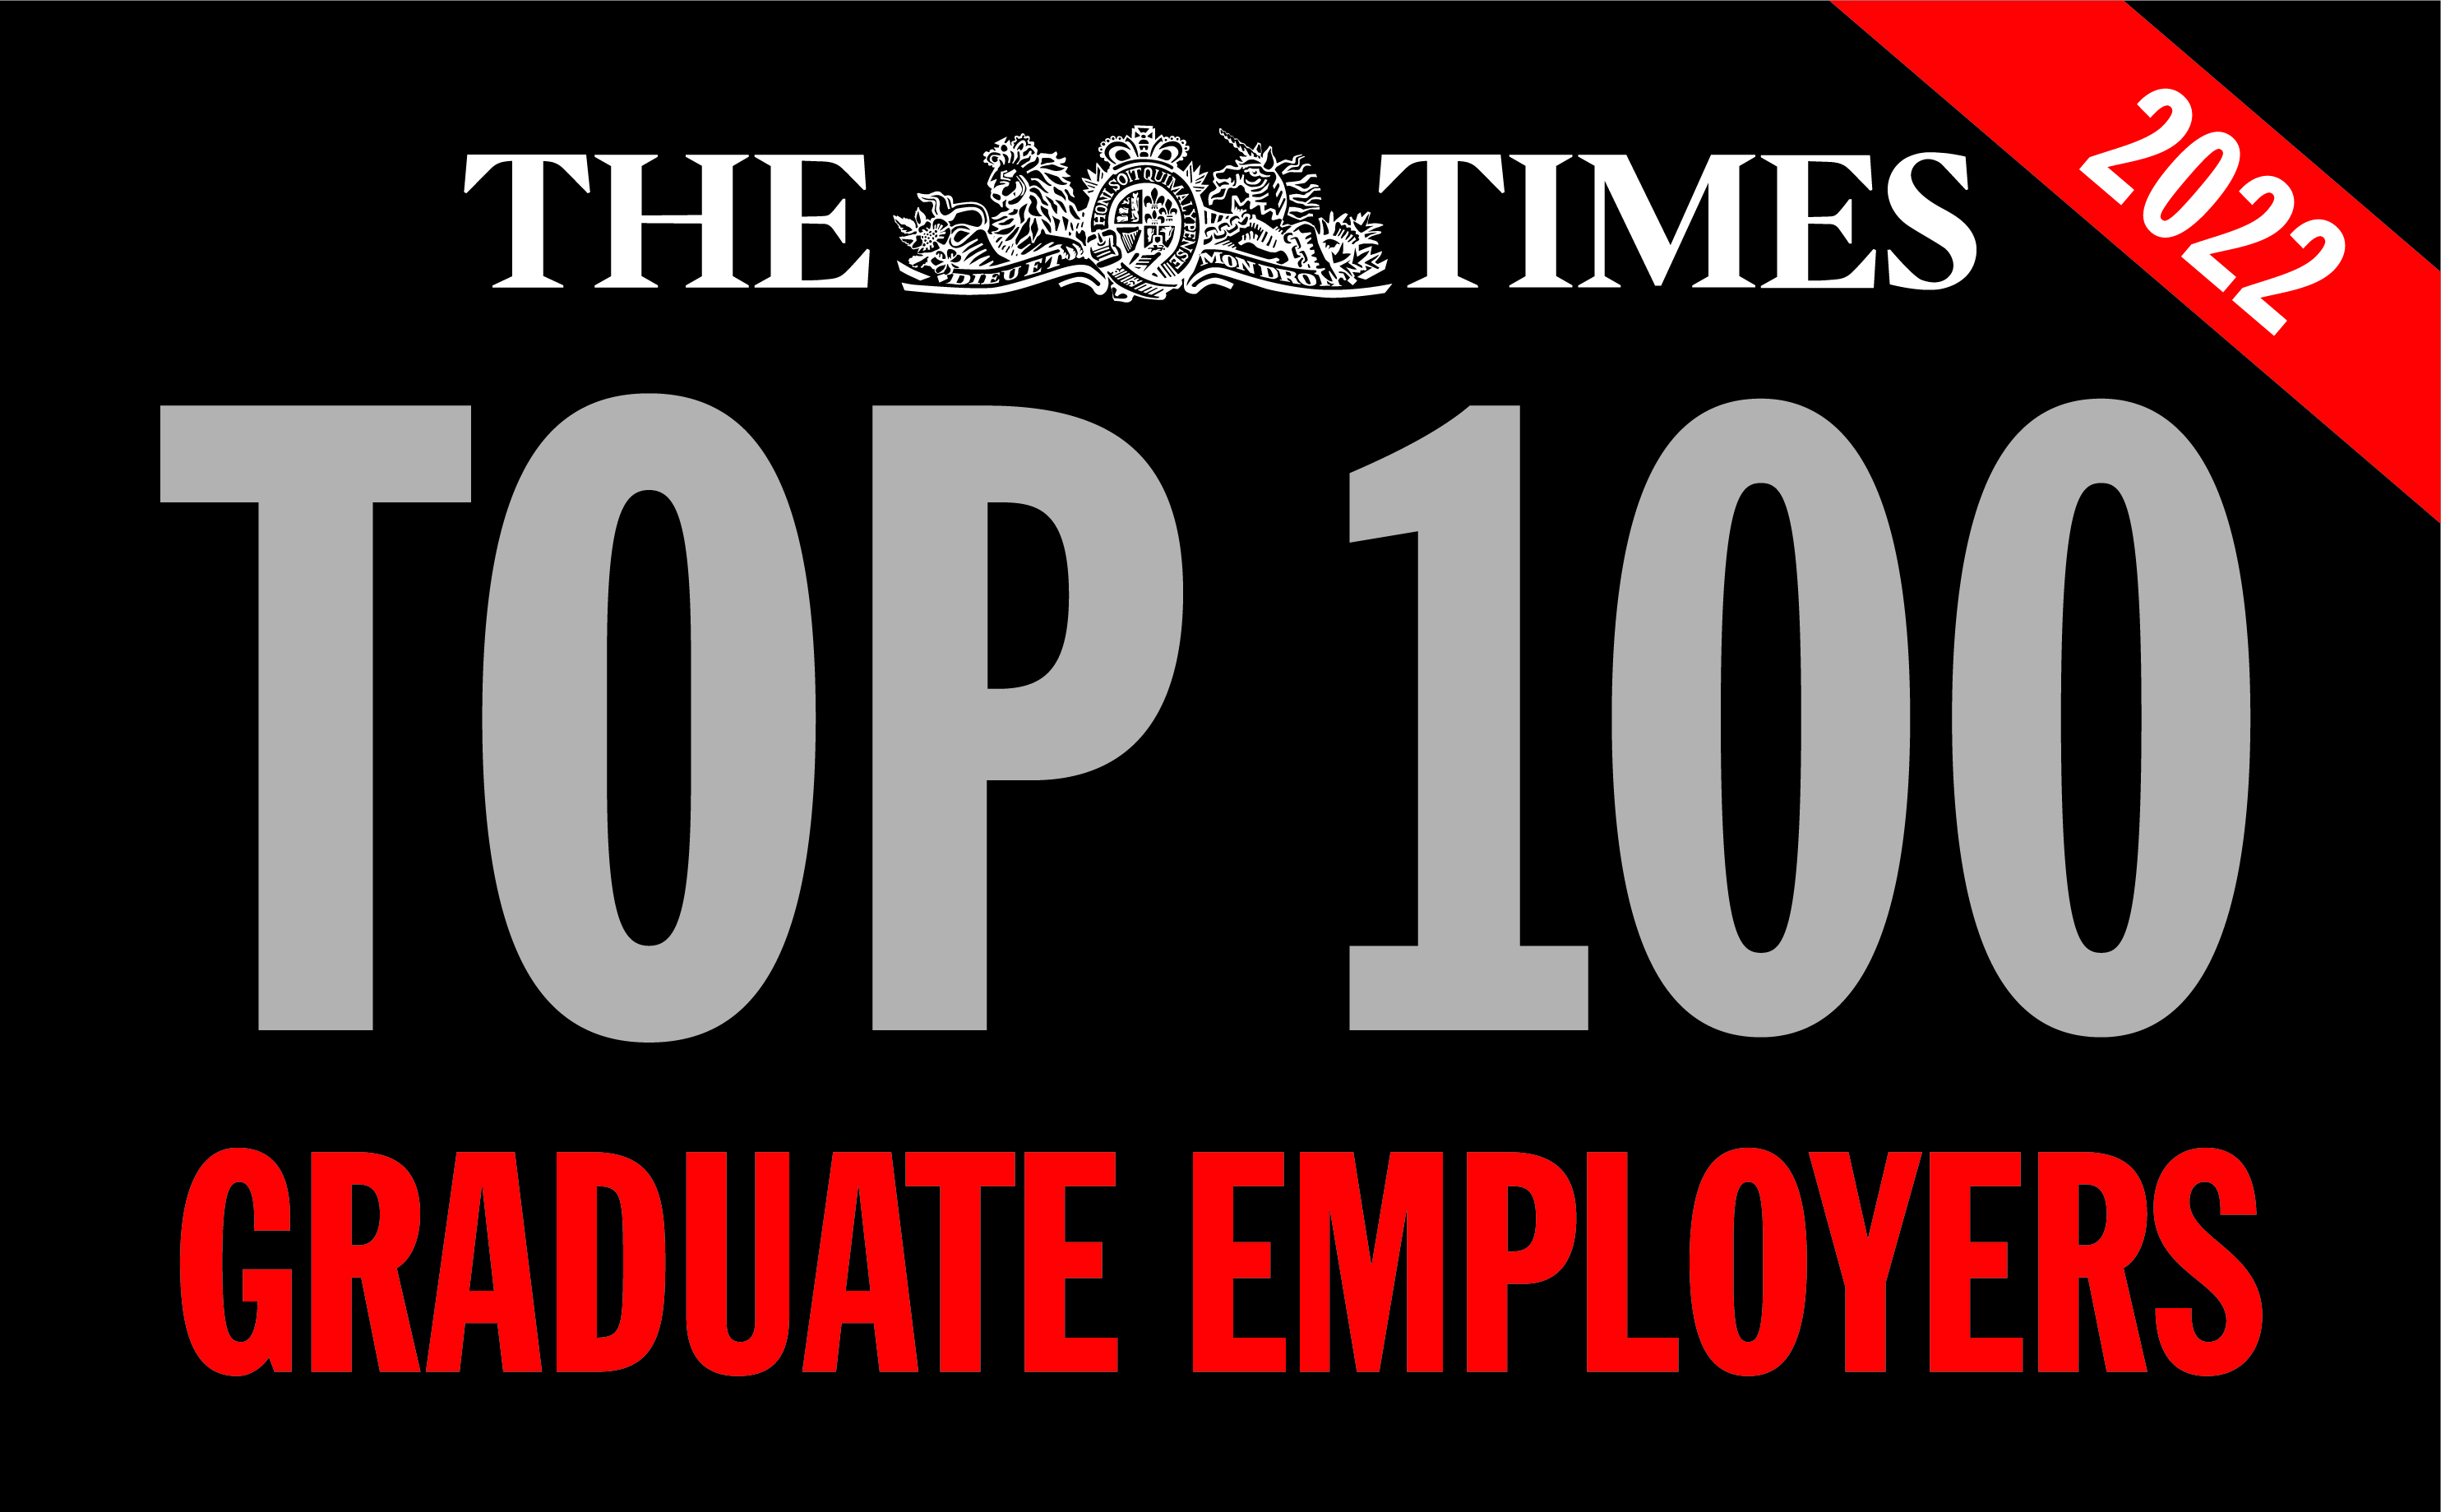 The Times Top 100 Graduate Employers 2022 logo